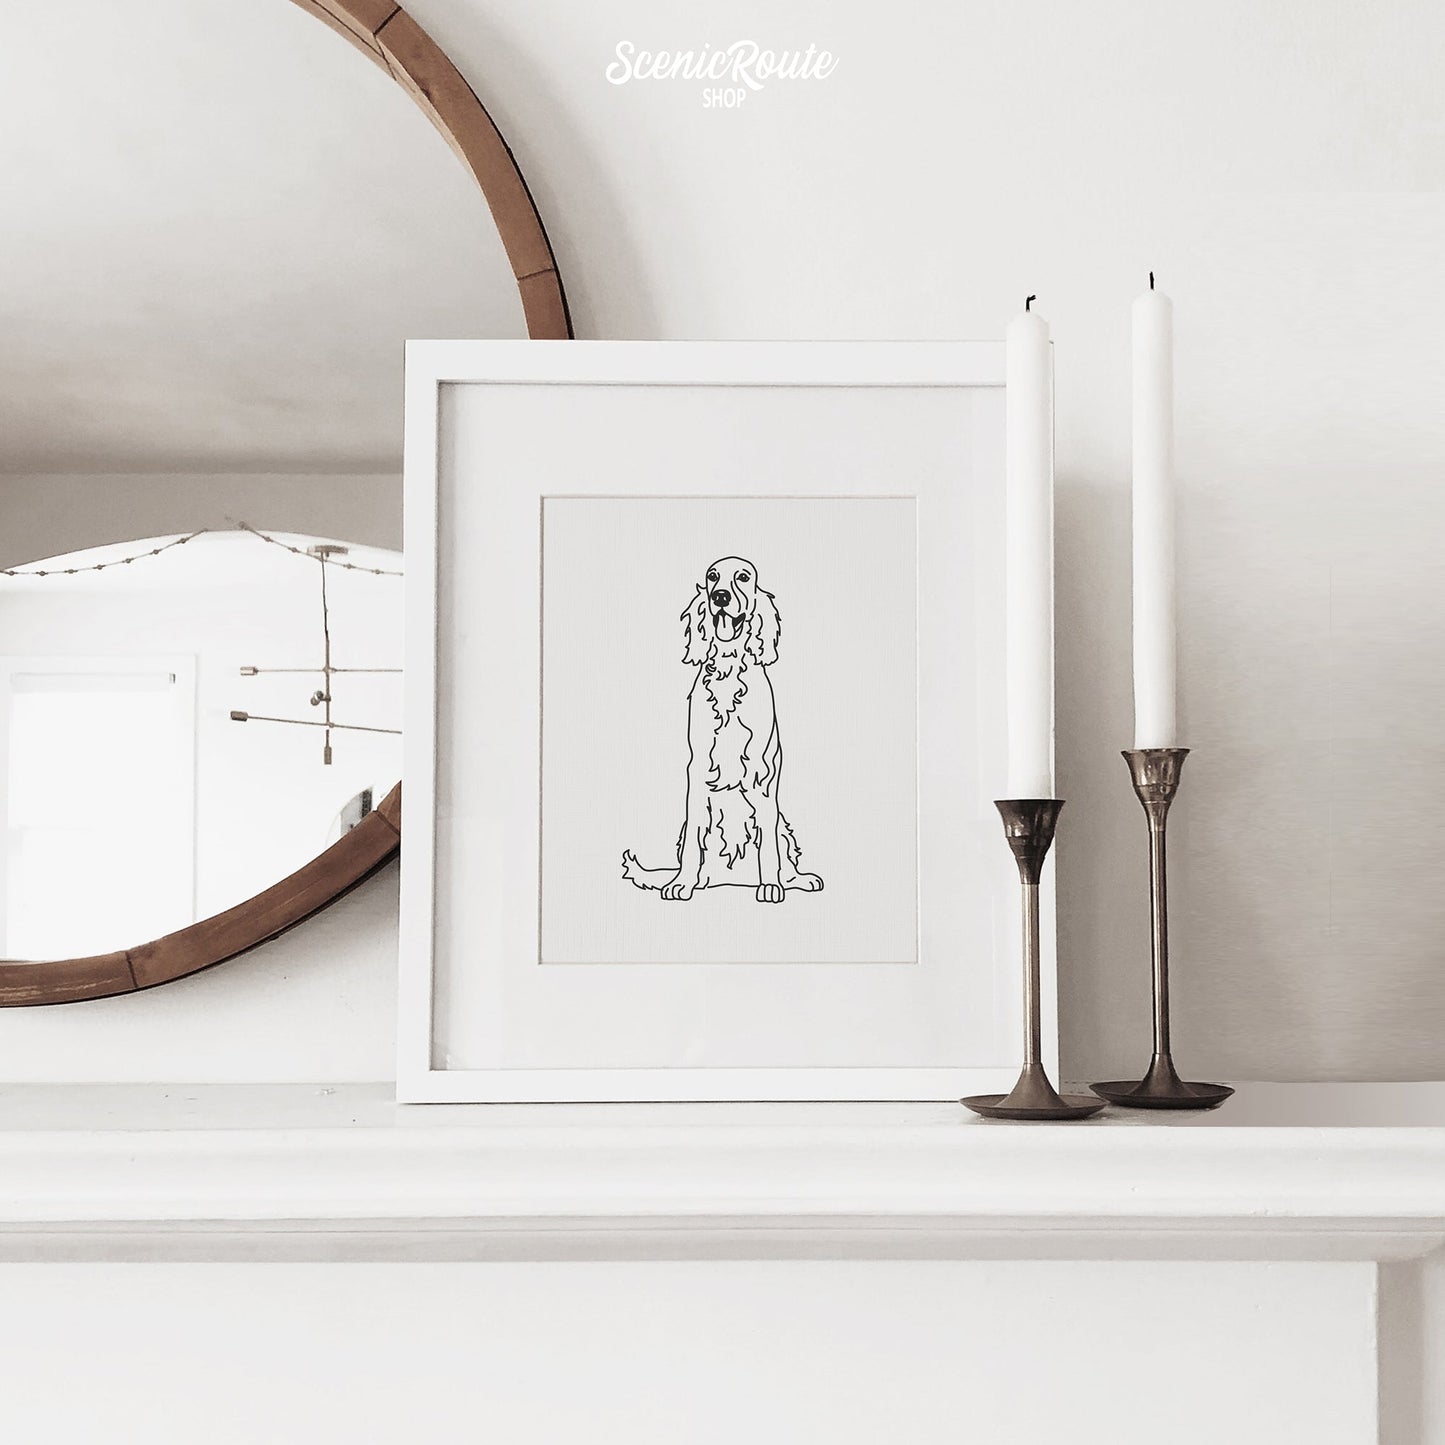 A framed line art drawing of an Irish Setter dog on a mantle with candles and a mirror